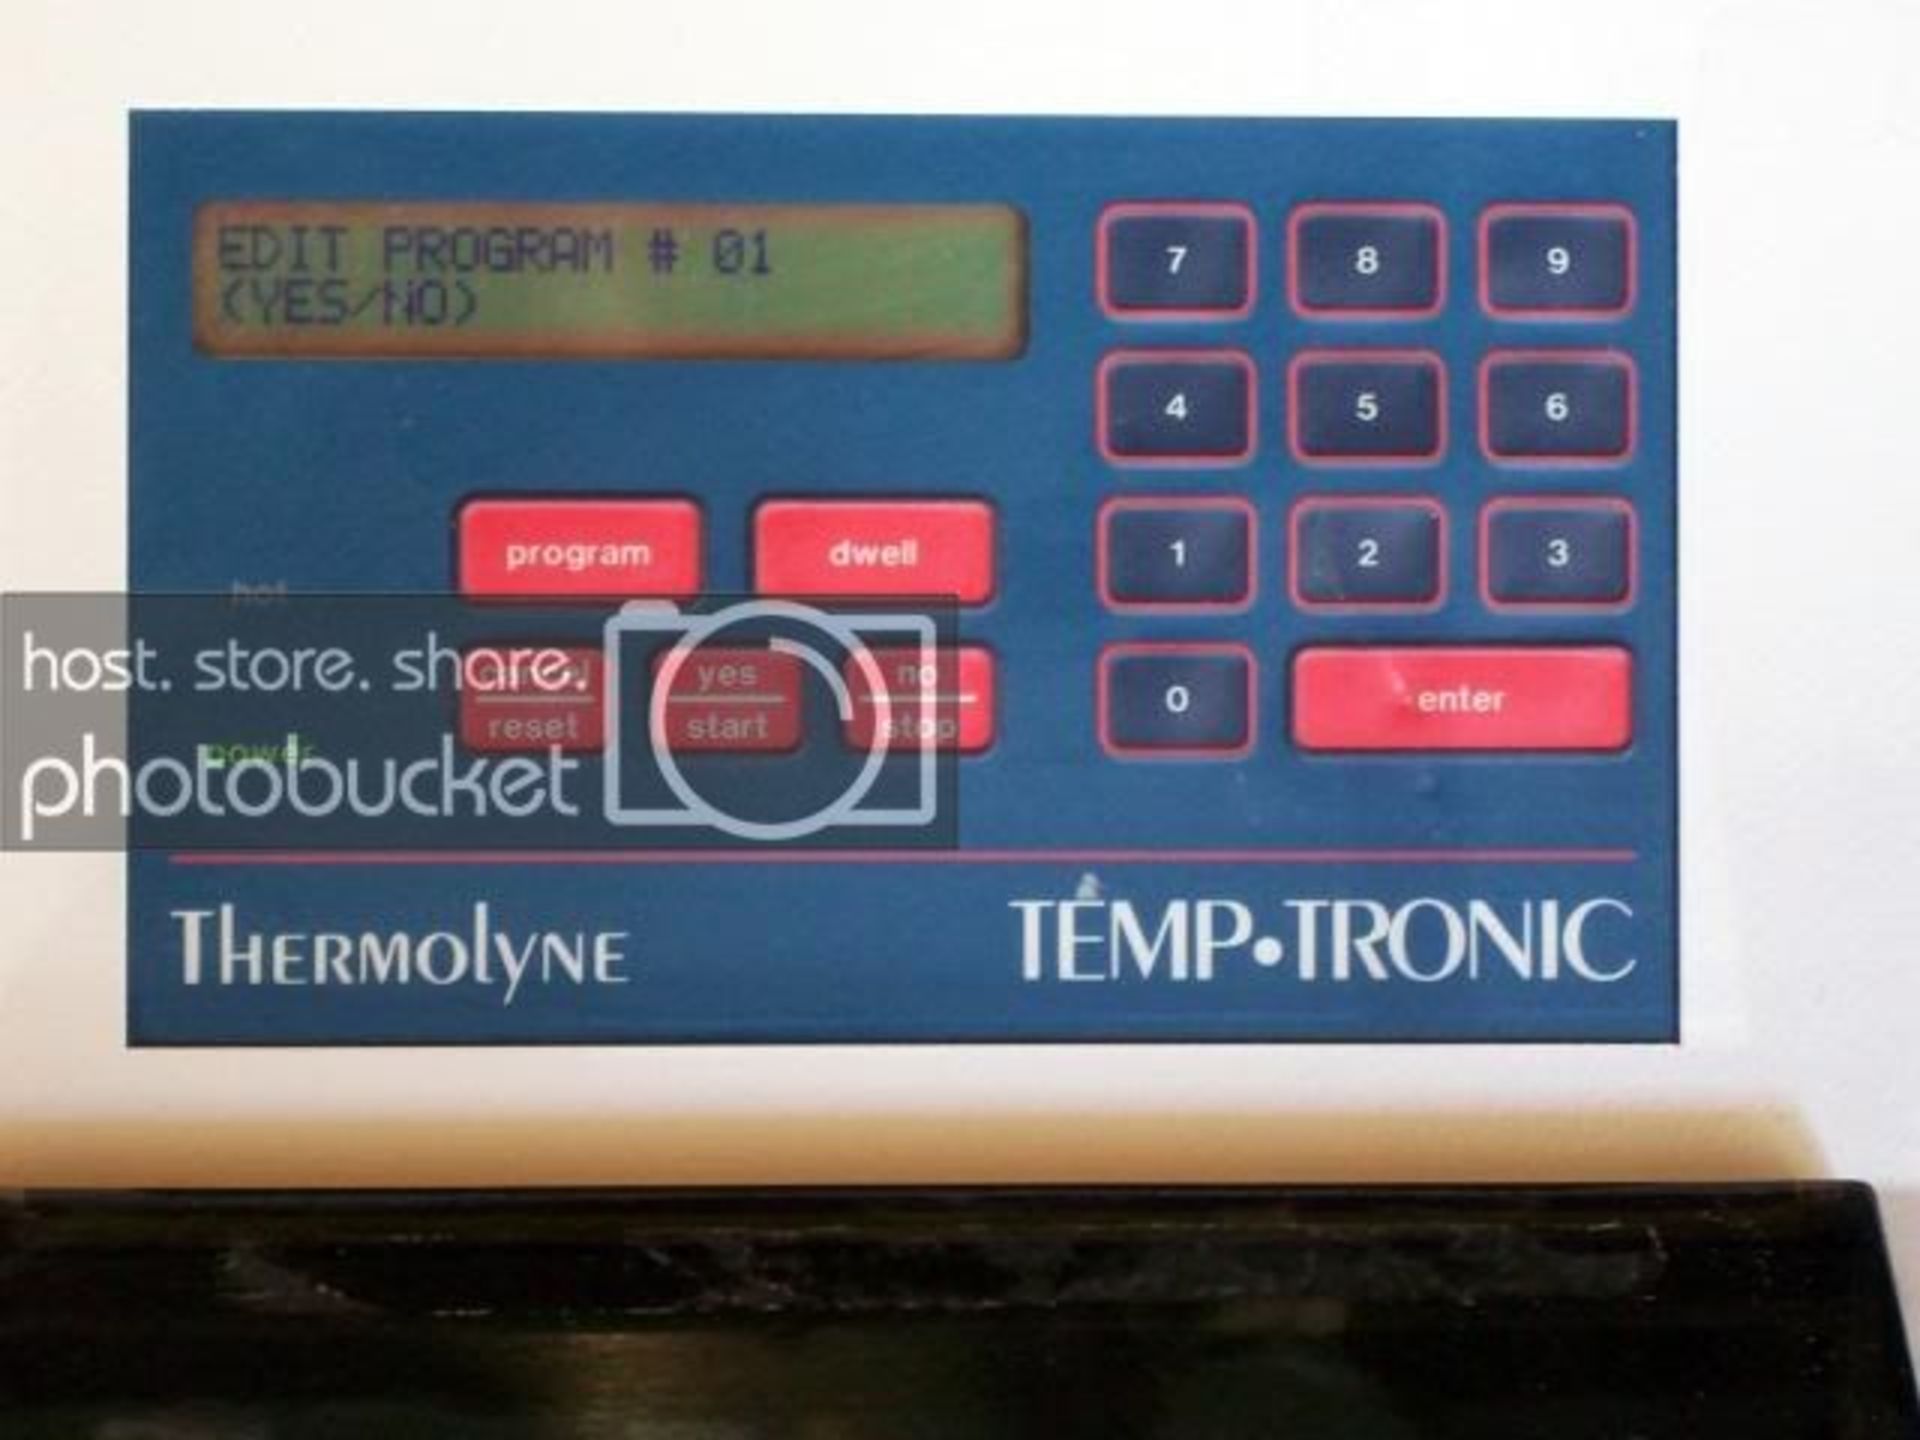 Thermolyne Temp-Tronic DB66925 DNA Thermal Cycler, Qty 1, 320394762884 - Image 4 of 9